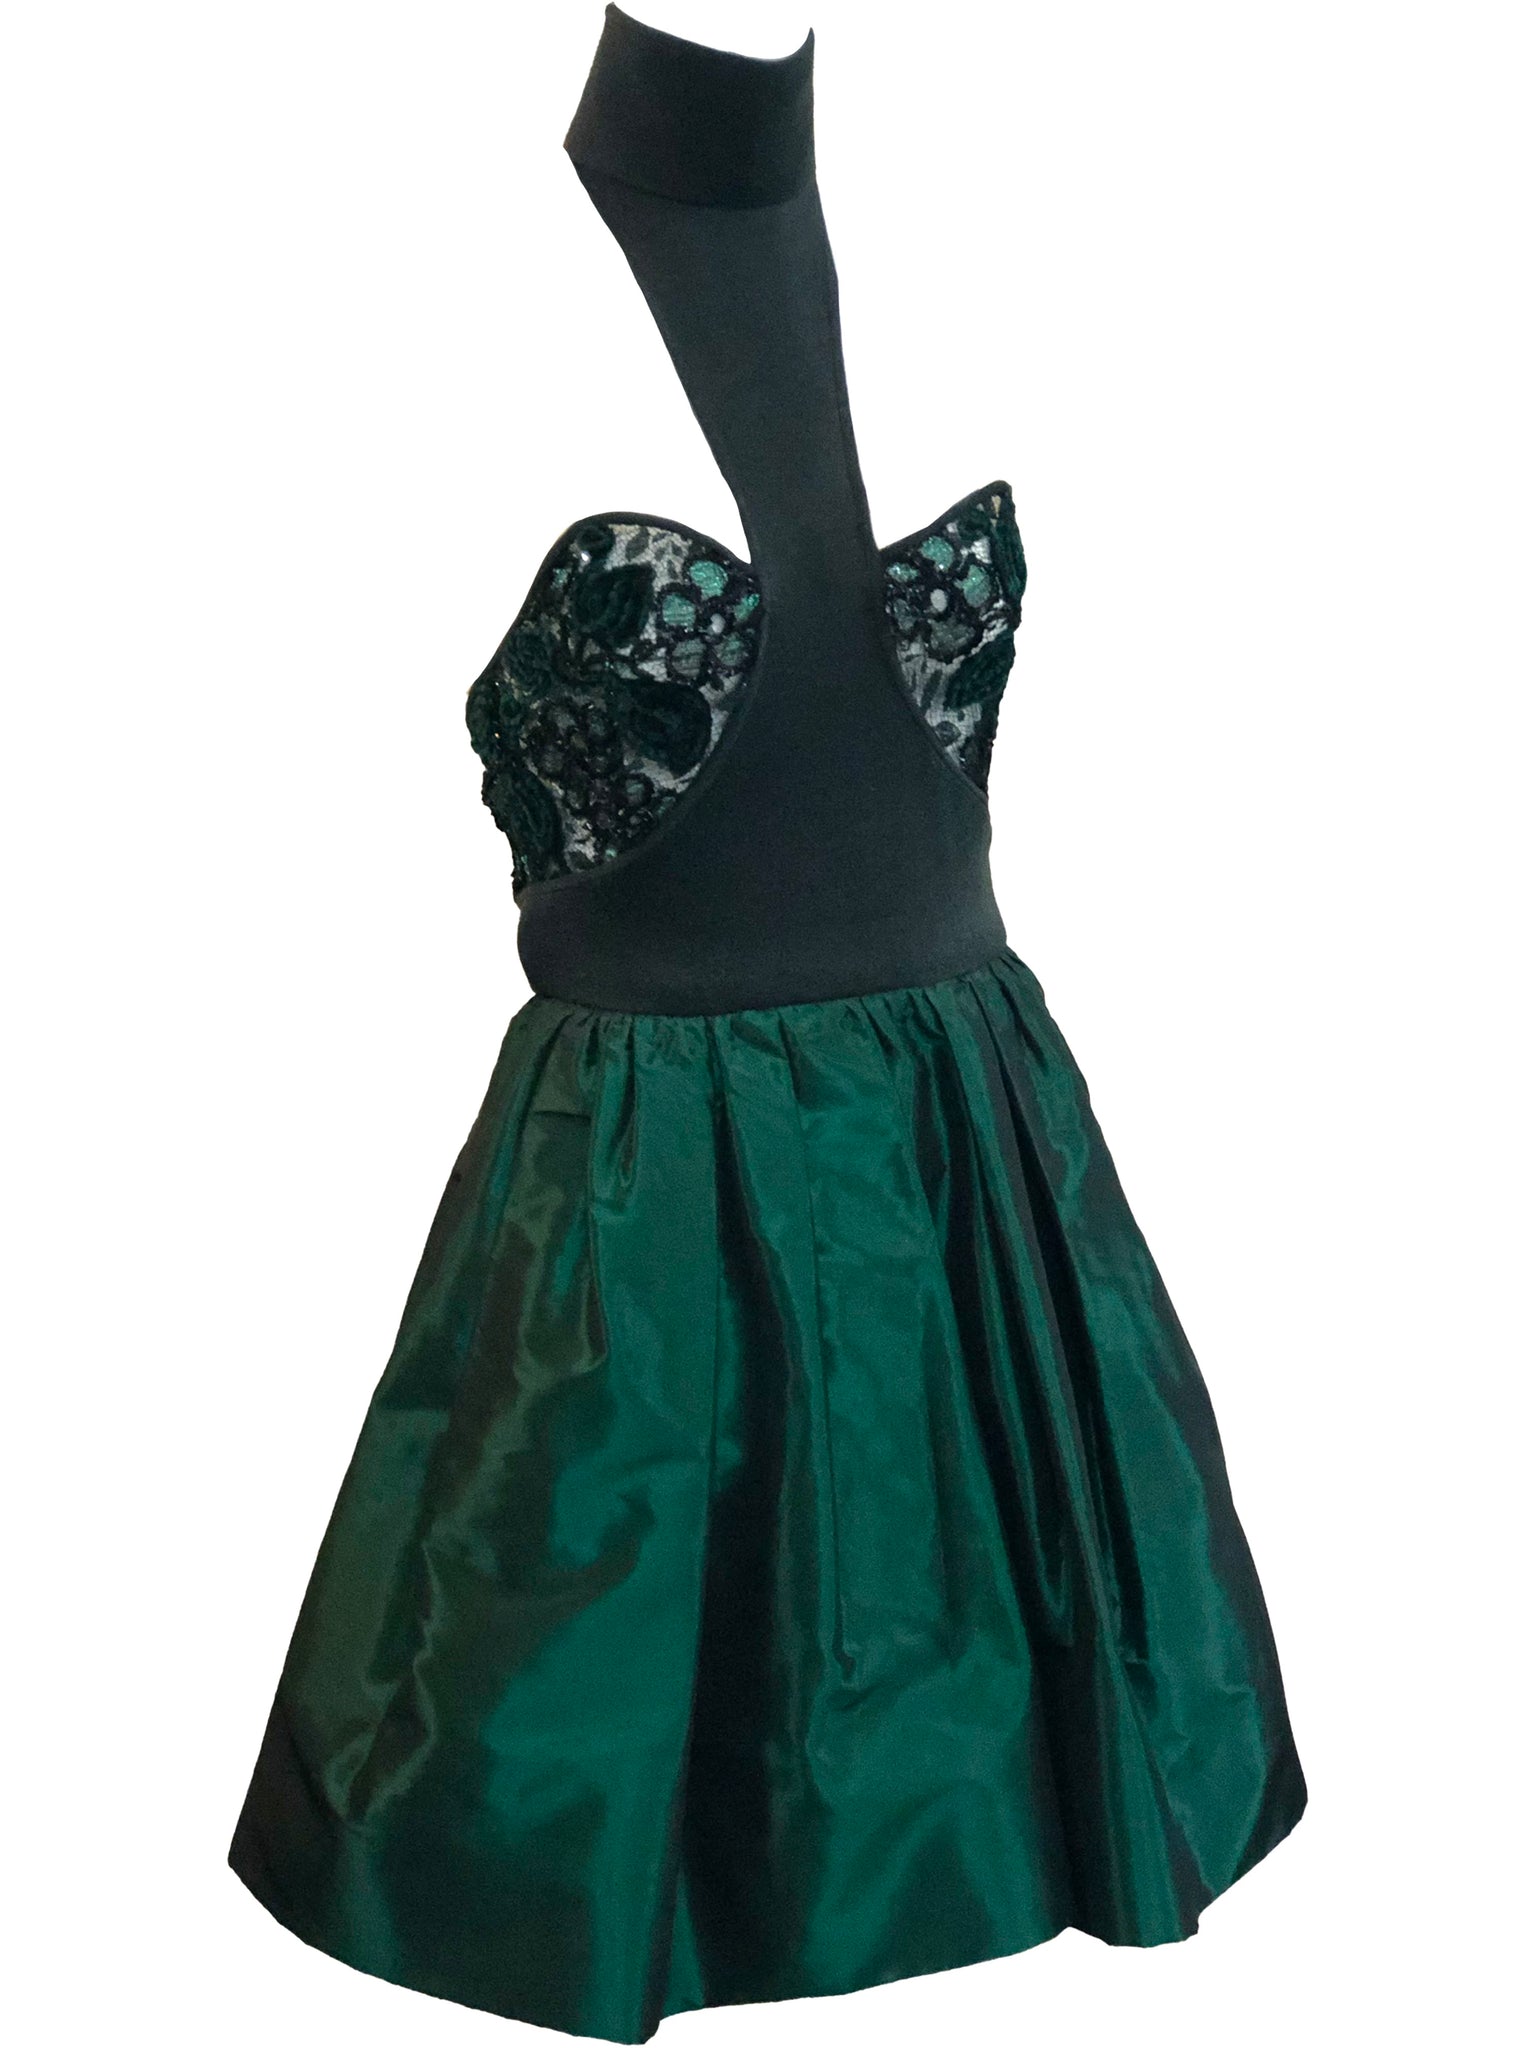 James Galanos 80s Emerald Green Taffeta and Lace Party Dress ANGLE 2 of 6